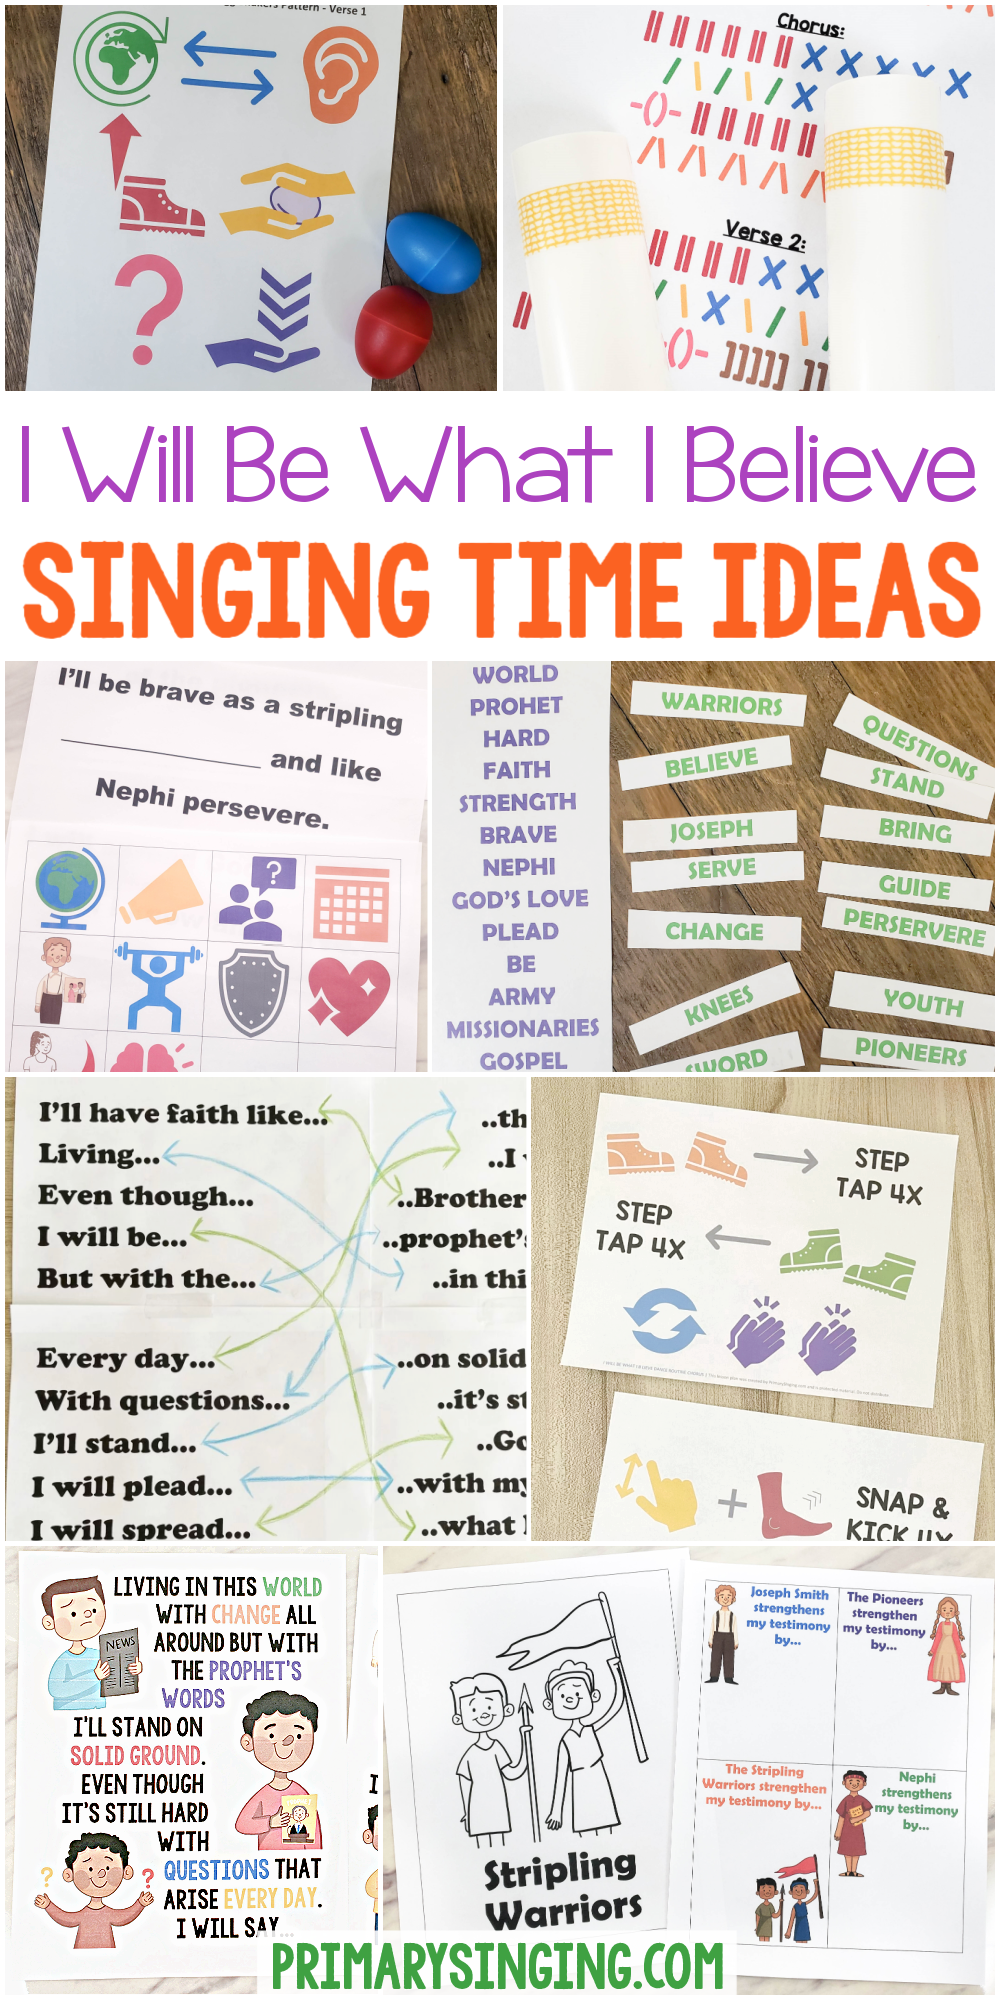 I Will Be What I Believe Singing Time Ideas to help you teach this beautiful Primary song by Blake Gillette! Includes a variety of great teaching ideas including egg shakers, maori sticks, line match, finger lights, testimony share, flip charts and more! Includes printable song helps for LDS Primary music leaders.